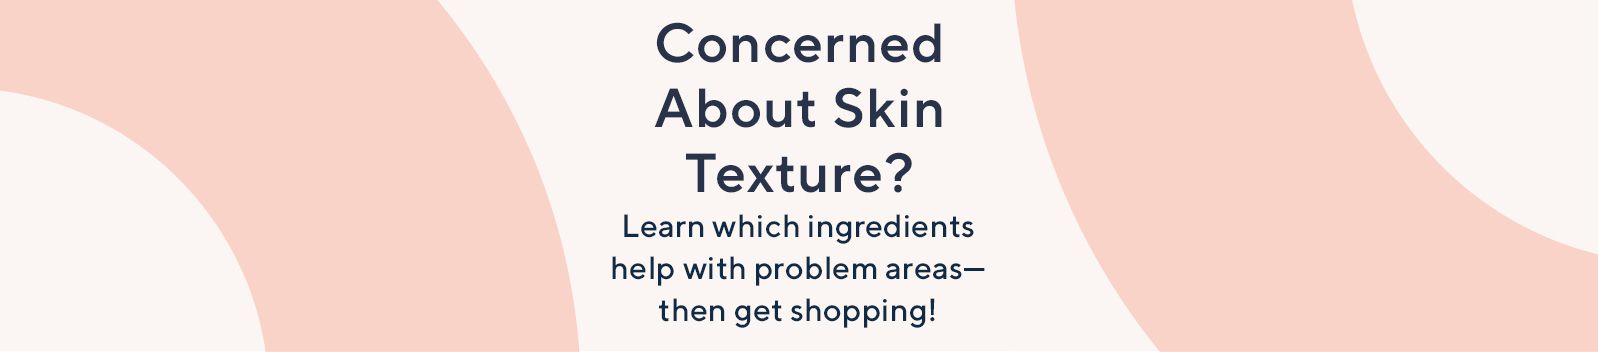 Concerned About Skin Texture?   Learn which ingredients help with problem areas—then get shopping!